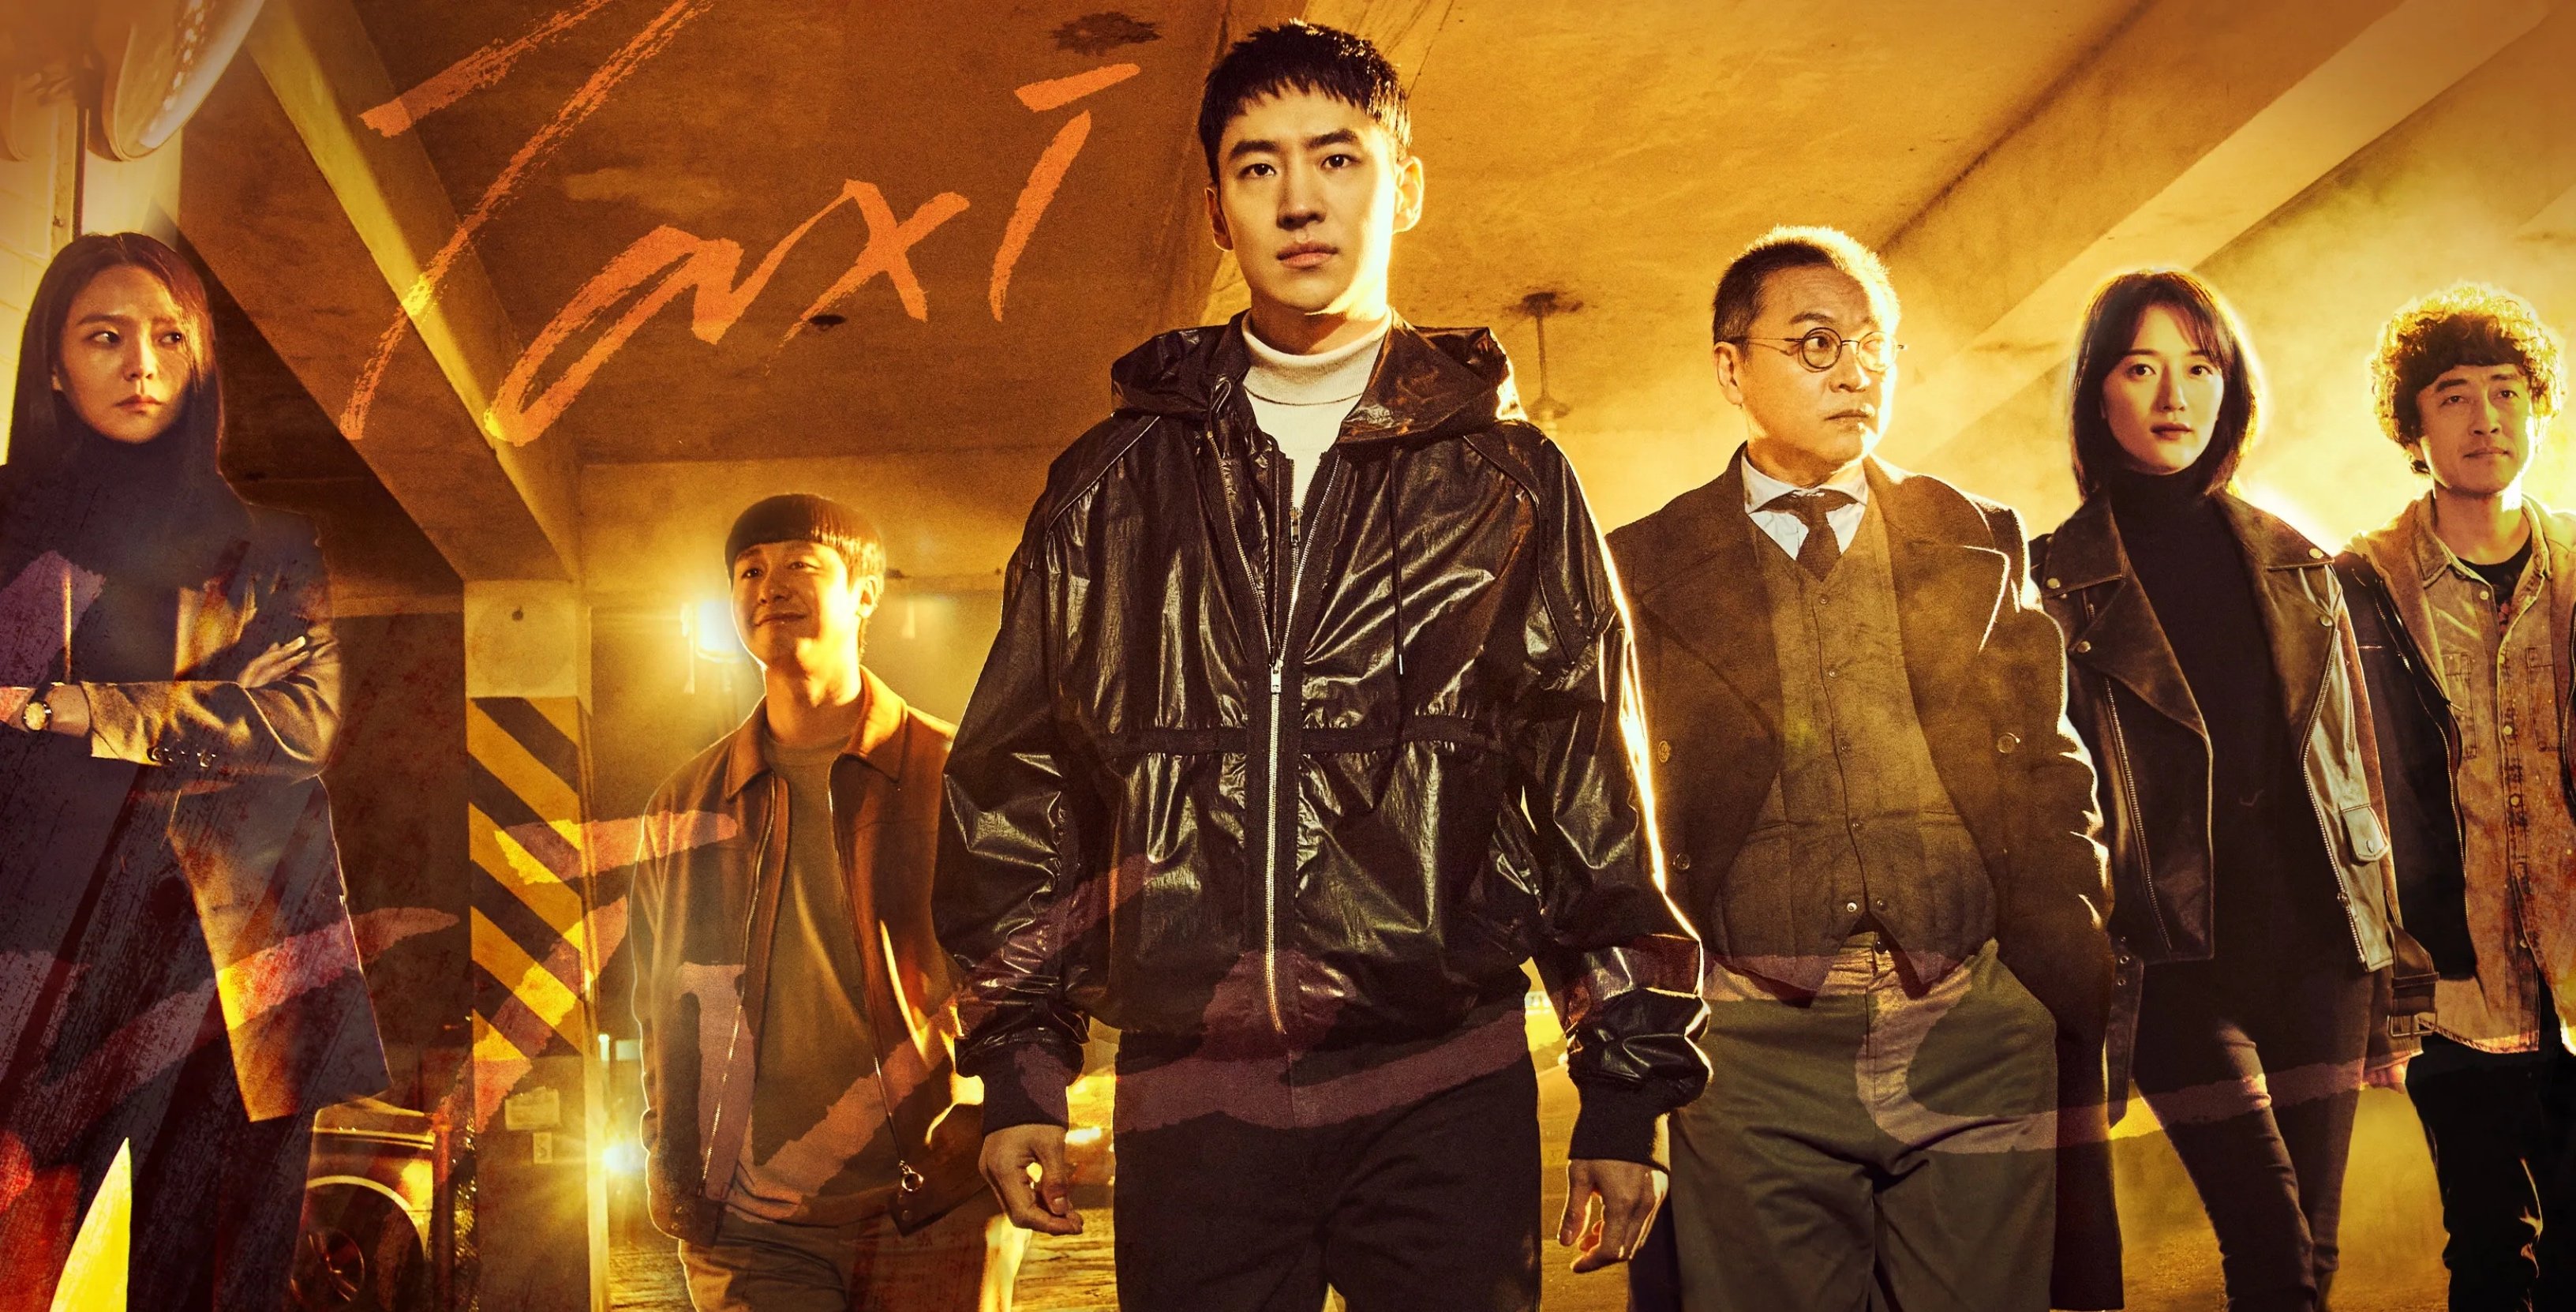 Actor Lee Je-hoon as Do-gi in 'Taxi Driver' dark crime K-drama wearing black jacket surrounded by people.